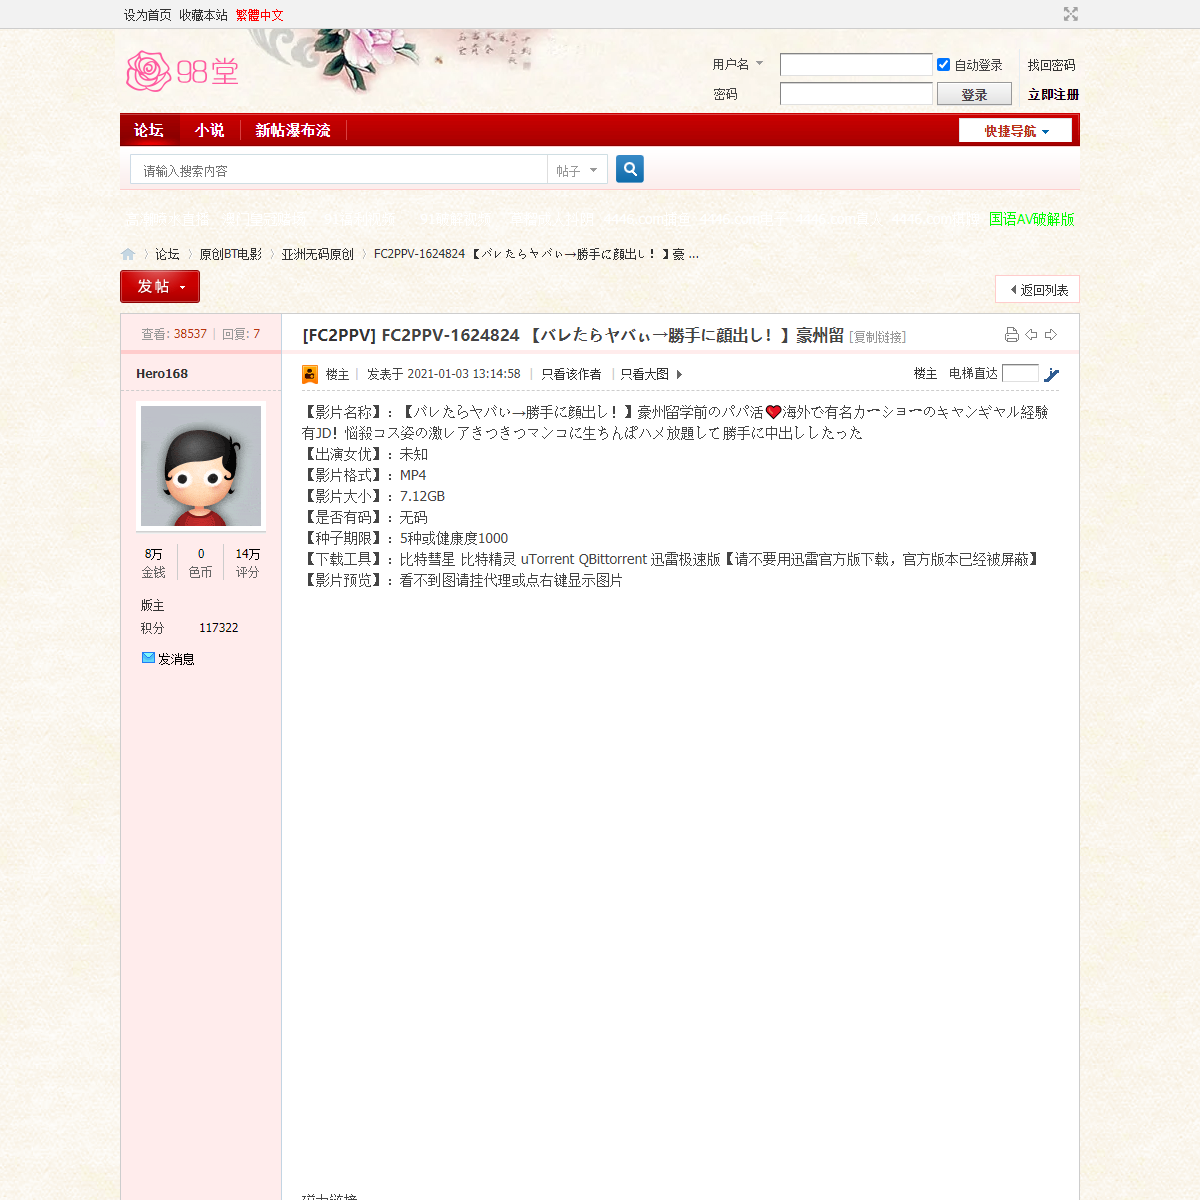 A complete backup of https://www.sehuatang.net/thread-436976-1-1.html